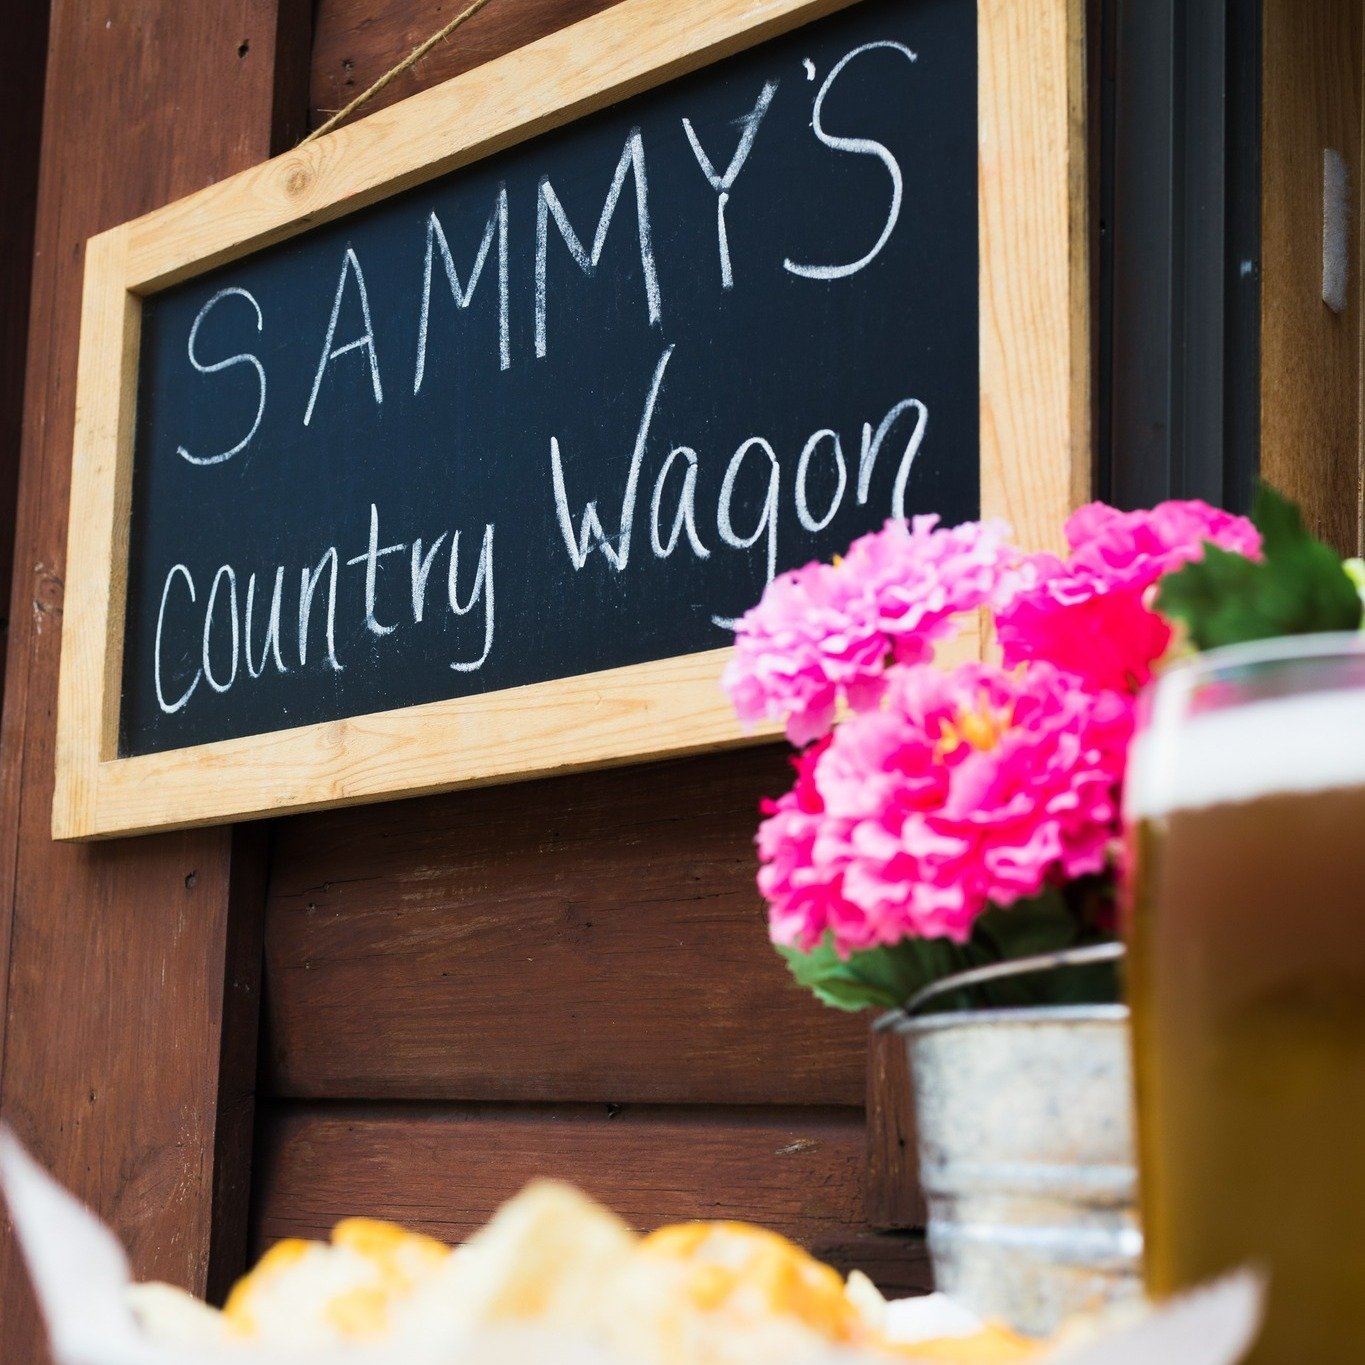 Sam and the wagon team open their 2024 season with us this evening! Join us at the brewery for good eats and the release of our summer lager El Lobo Loco! #Wednesday #new #beer #craftbeer #foodtruck #schenectady #spring #summer #lager